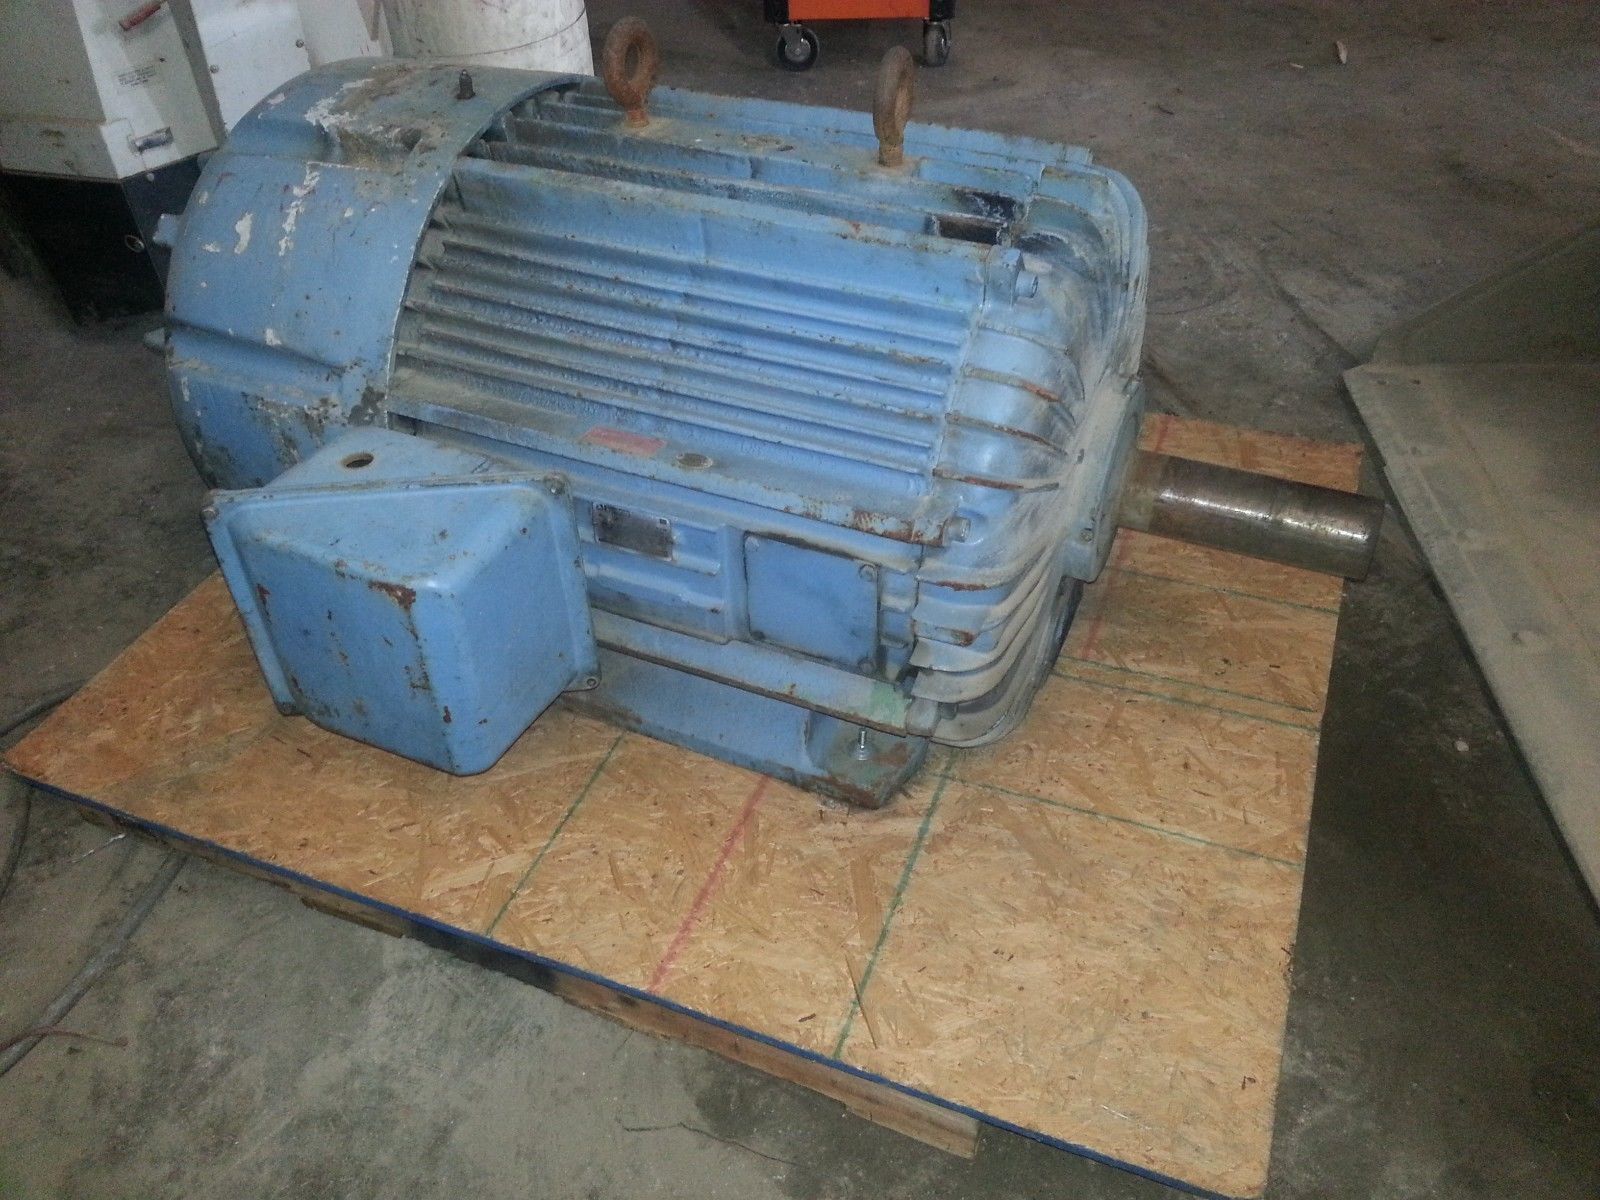 Delco Electric 100 HP Motor For Sale